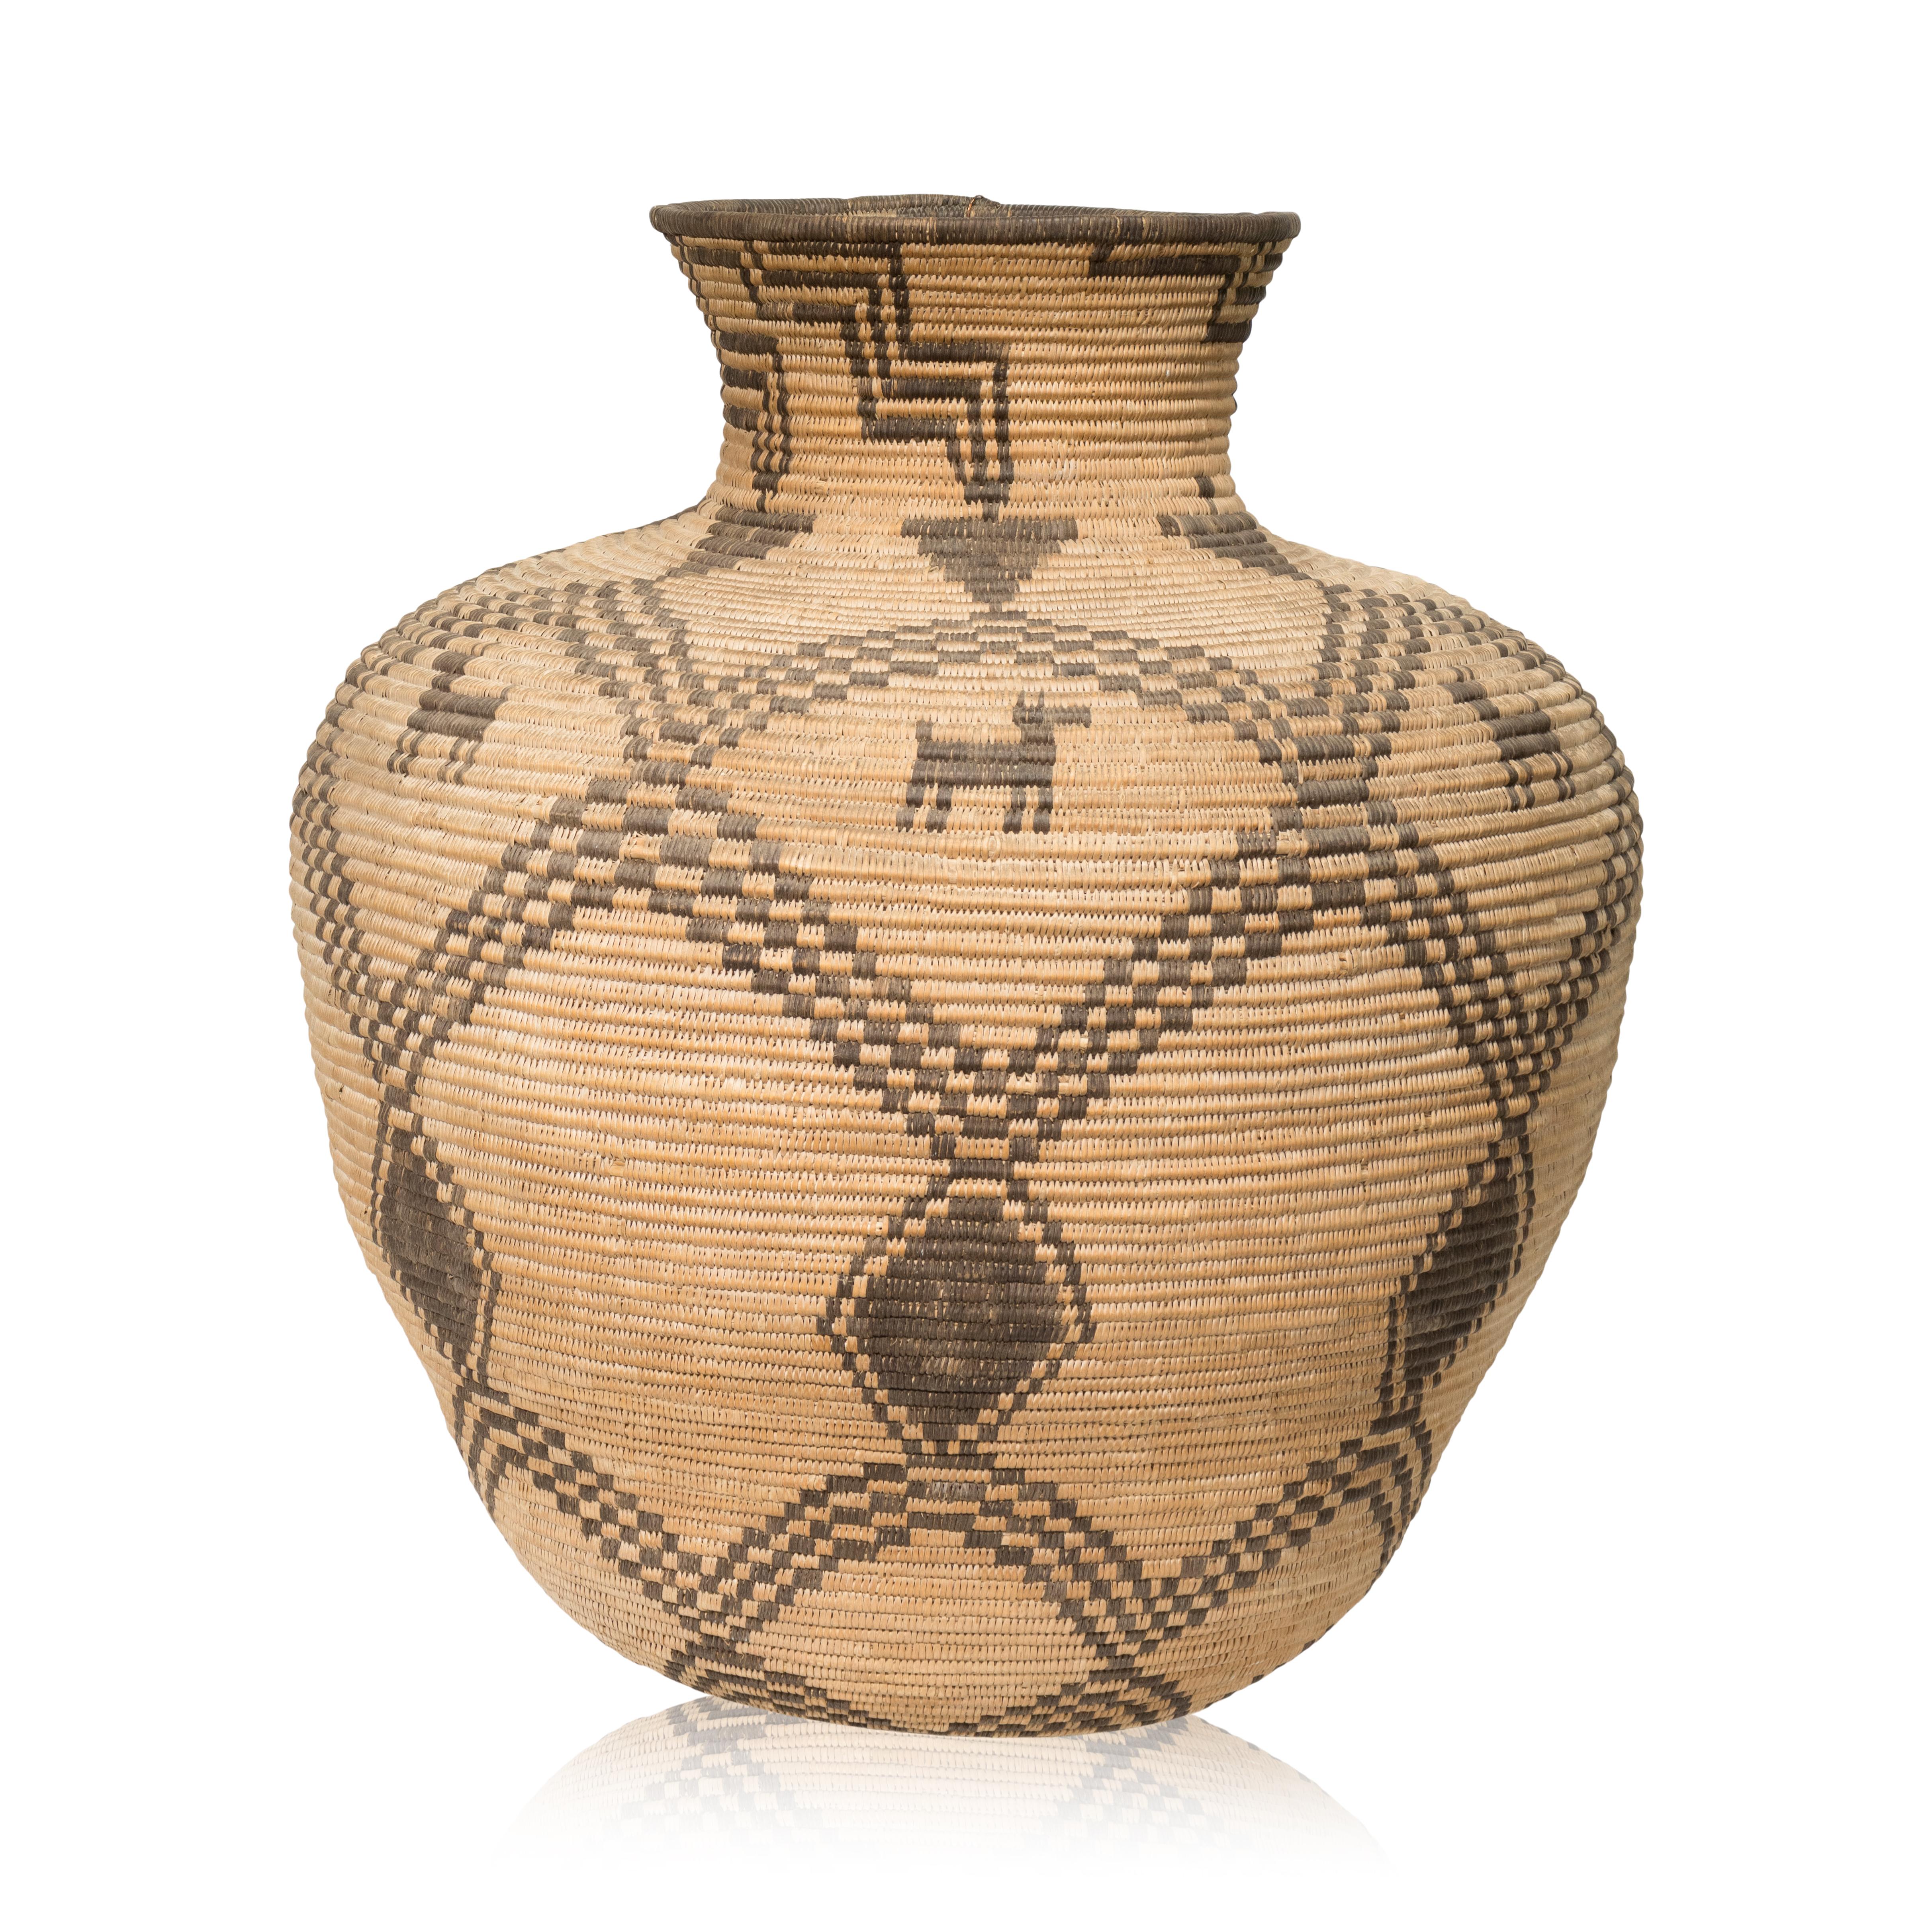 Apache figural basketry olla with seven dogs on shoulder. After an olla was filled to the brim with wild grass seeds such as chia or amaranth, or domestic plant products like corn or beans, a basketry lid or cover was put on top to protect the food